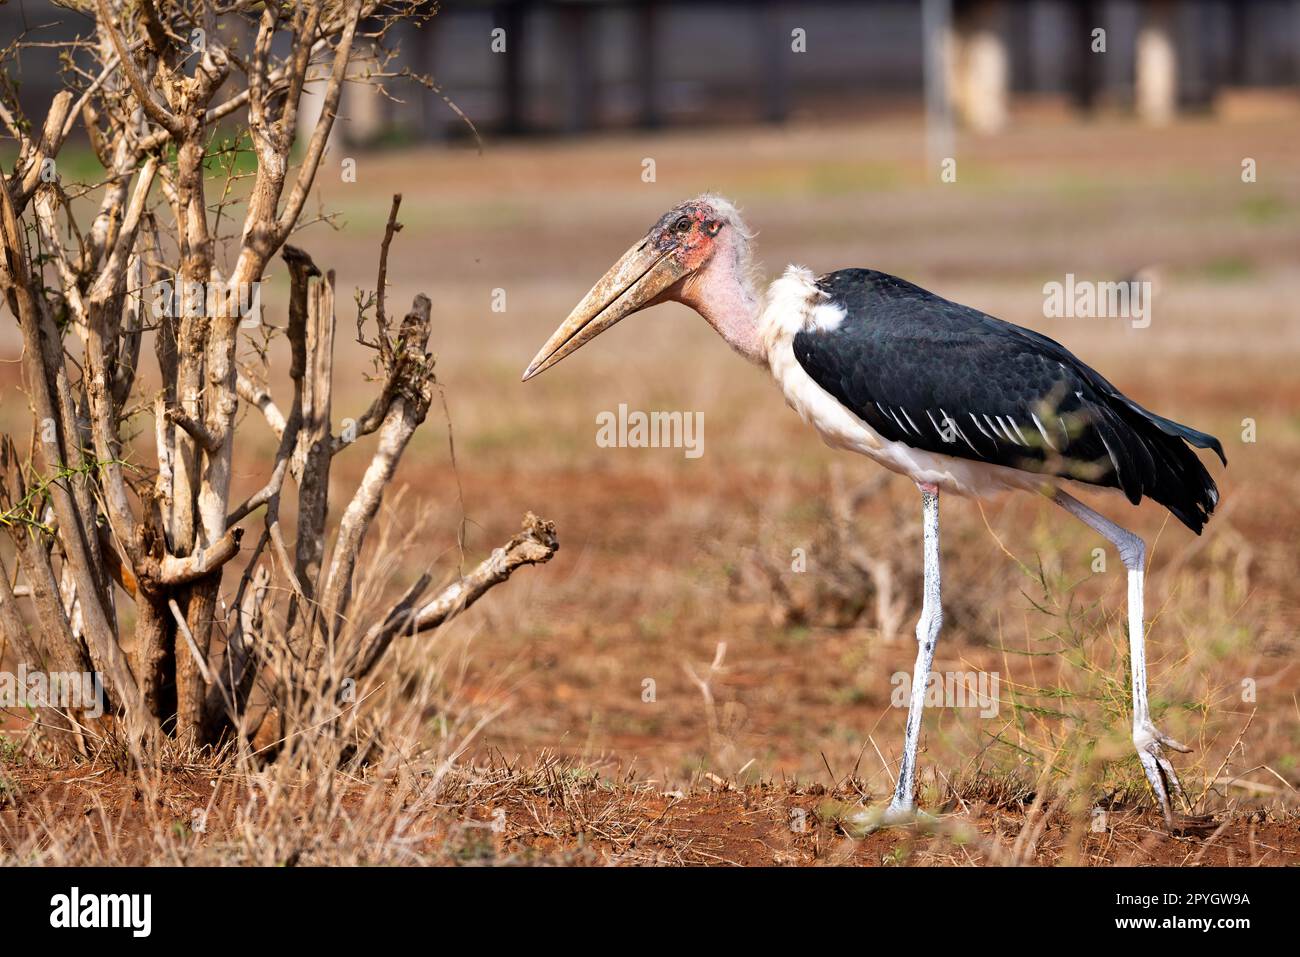 This photo showcases the impressive and imposing presence of the marabou stork, as it walks confidently across the savannah of the Kenyan Tsavo East r Stock Photo